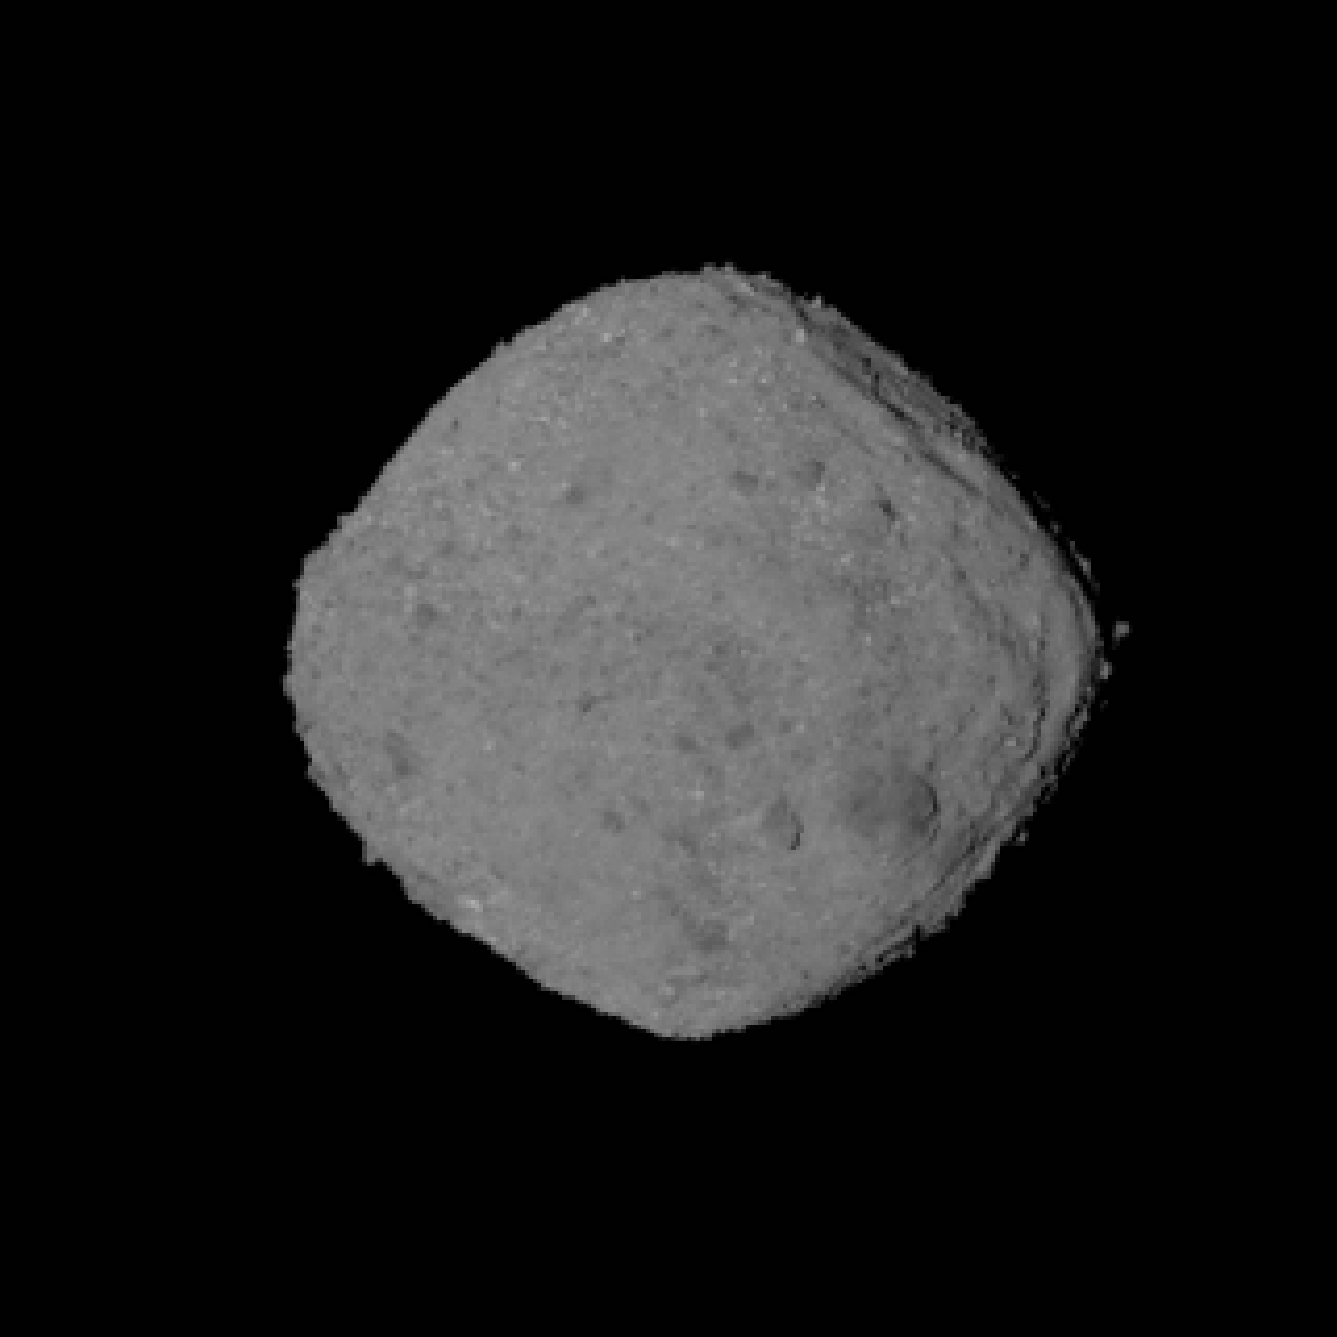 A gif of a set of images sowing the asteroid Bennu rotating 1 full revolution.